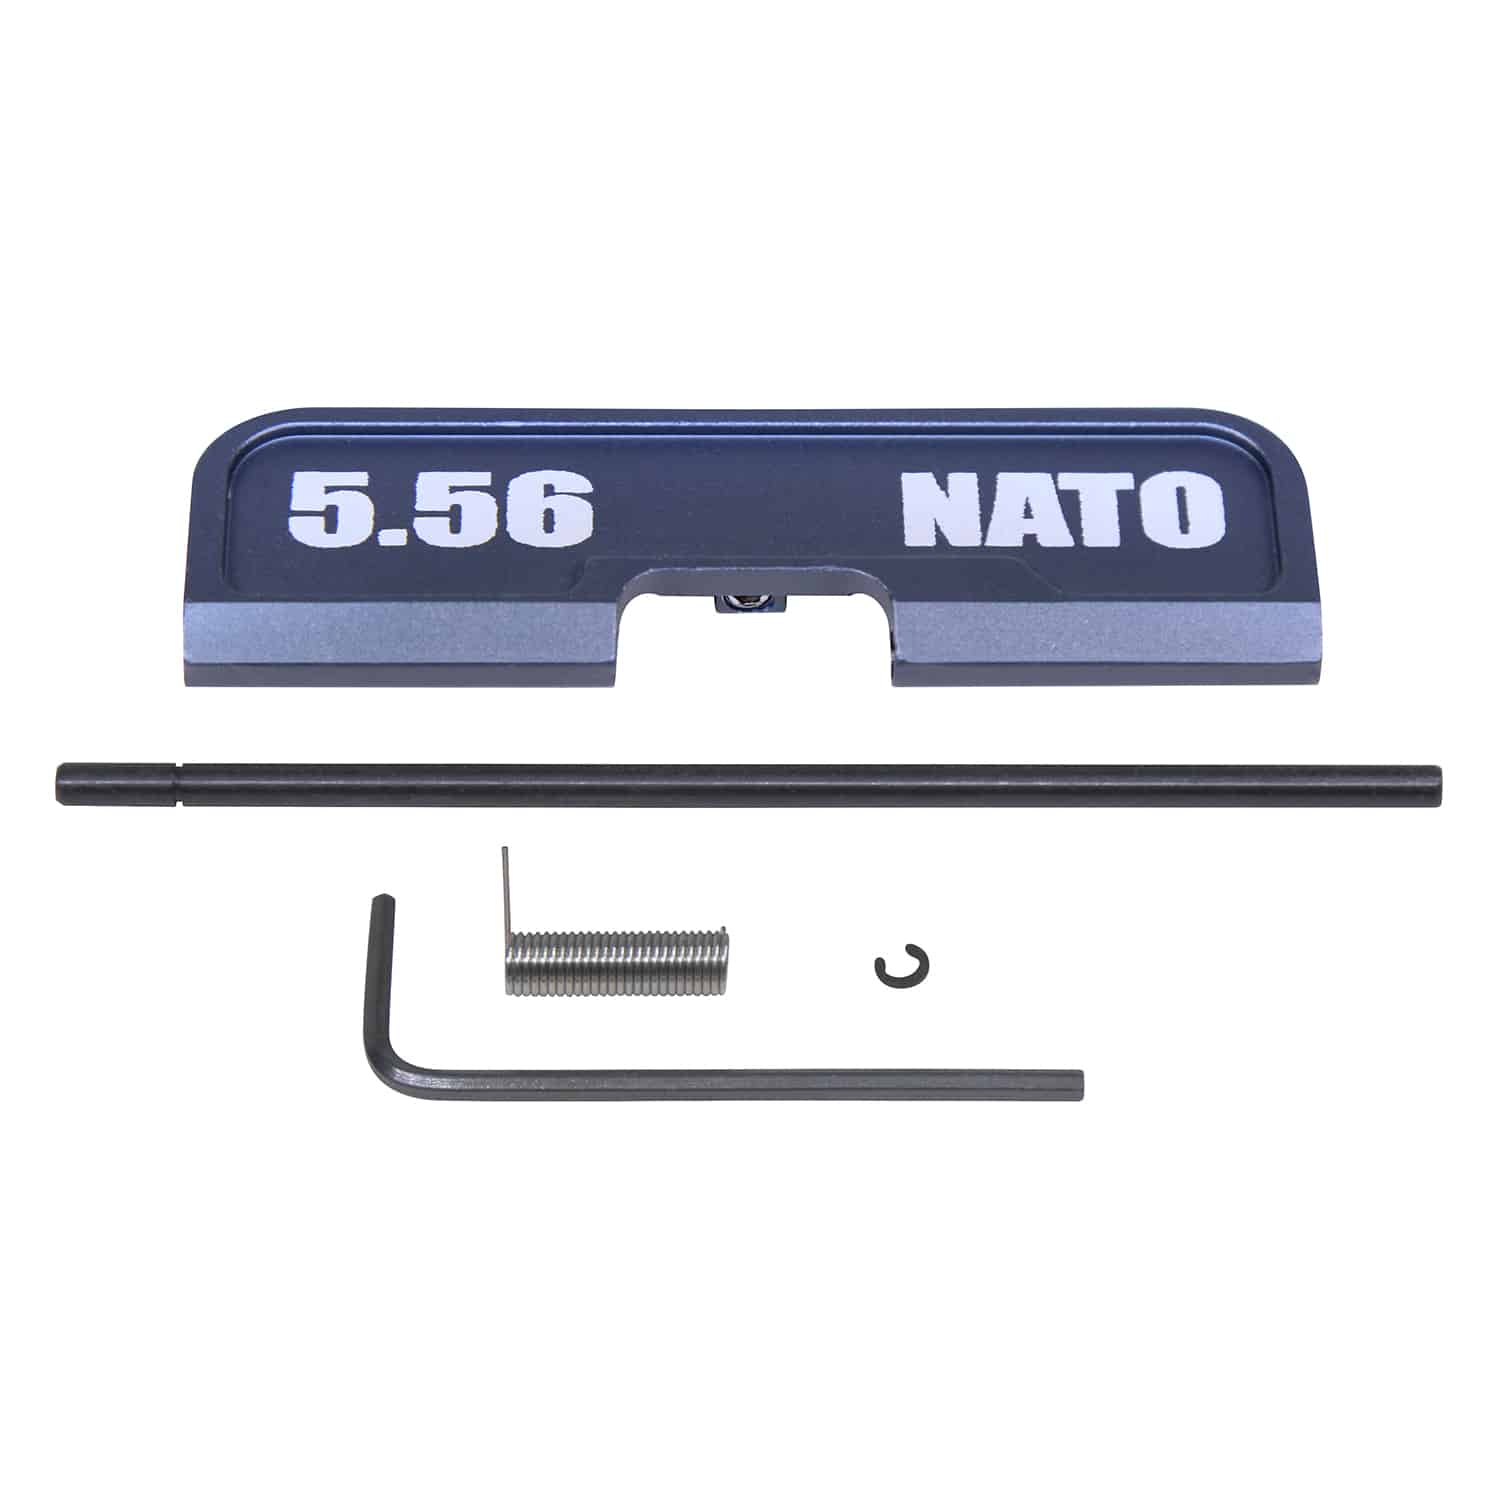 AR-15 Ejection Port Dust Cover Gen 3 '5.56 NATO' Lasered in Anodized Grey